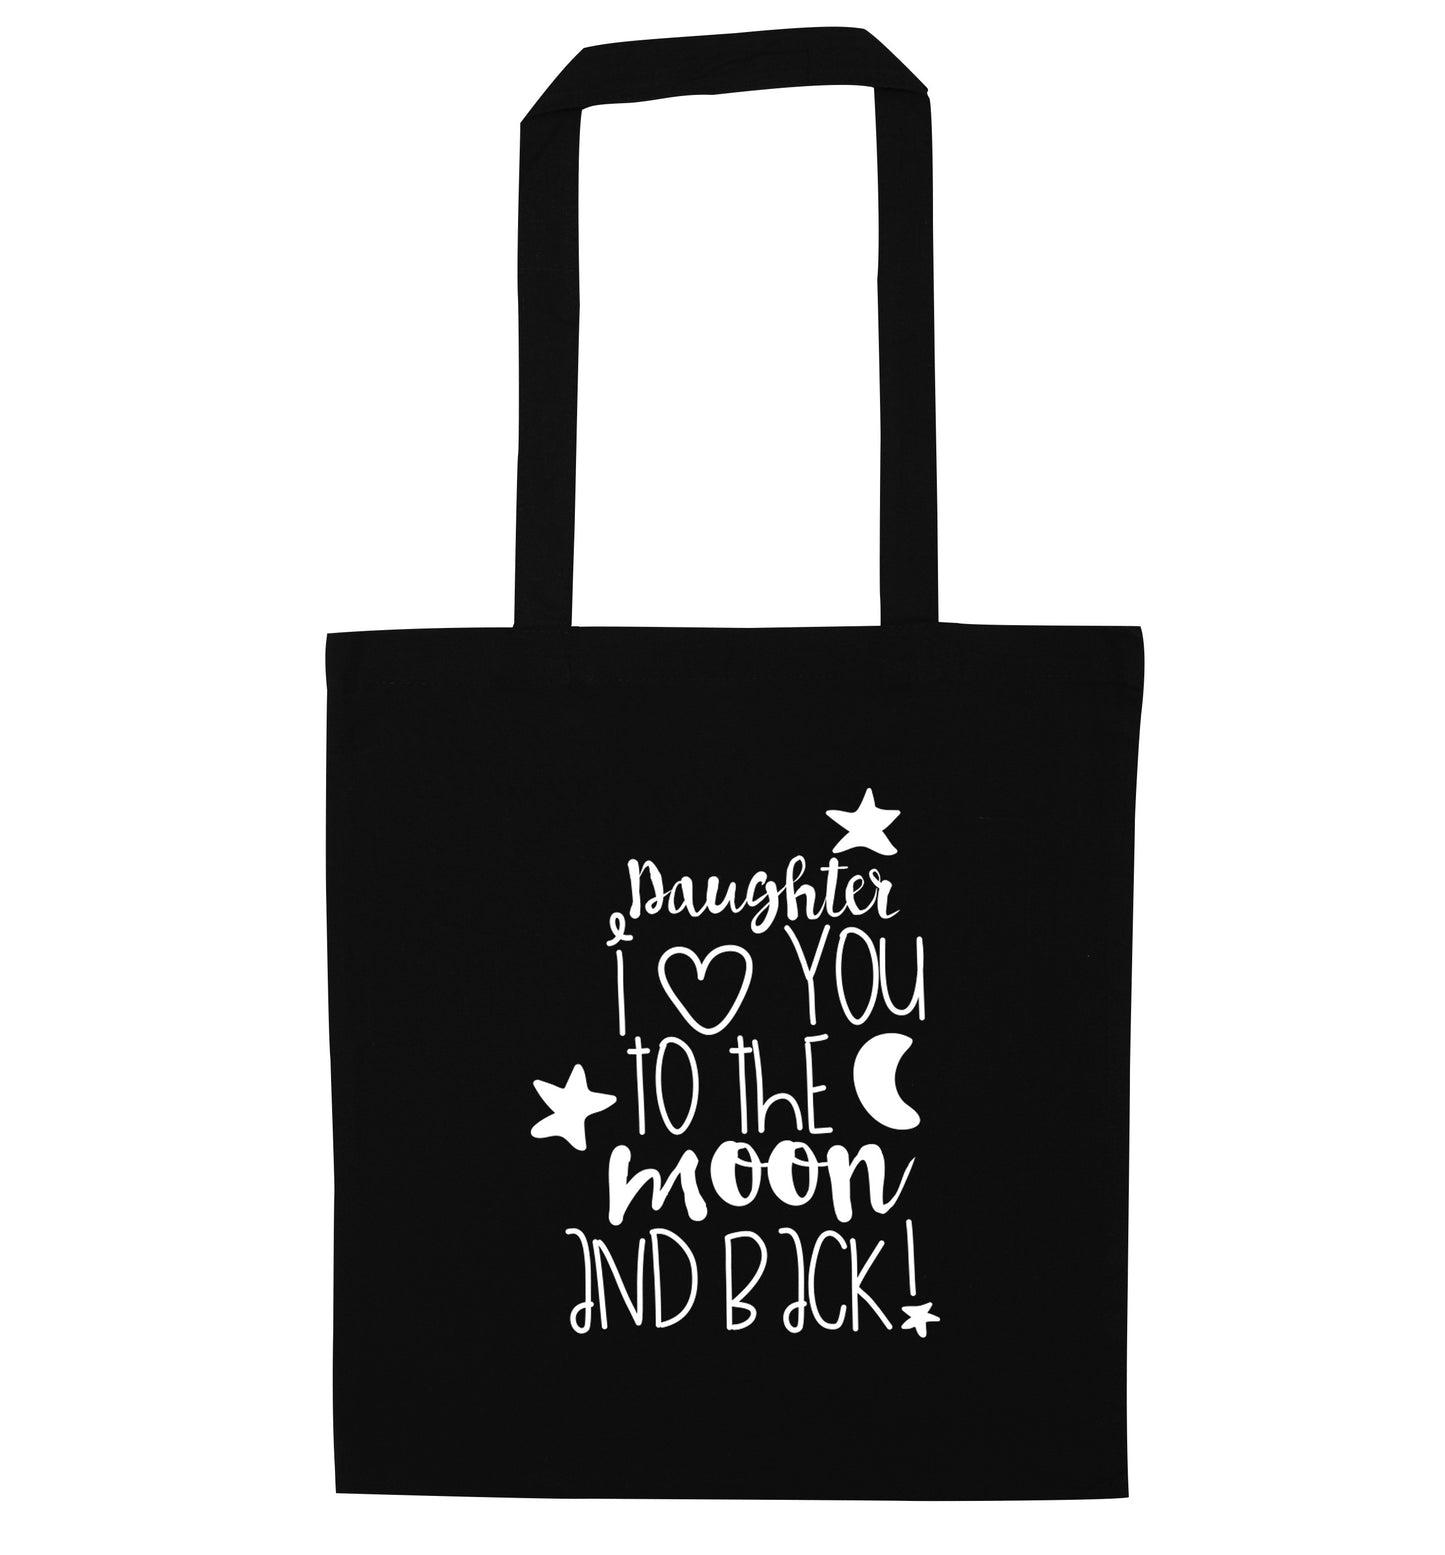 Daughter I love you to the moon and back black tote bag